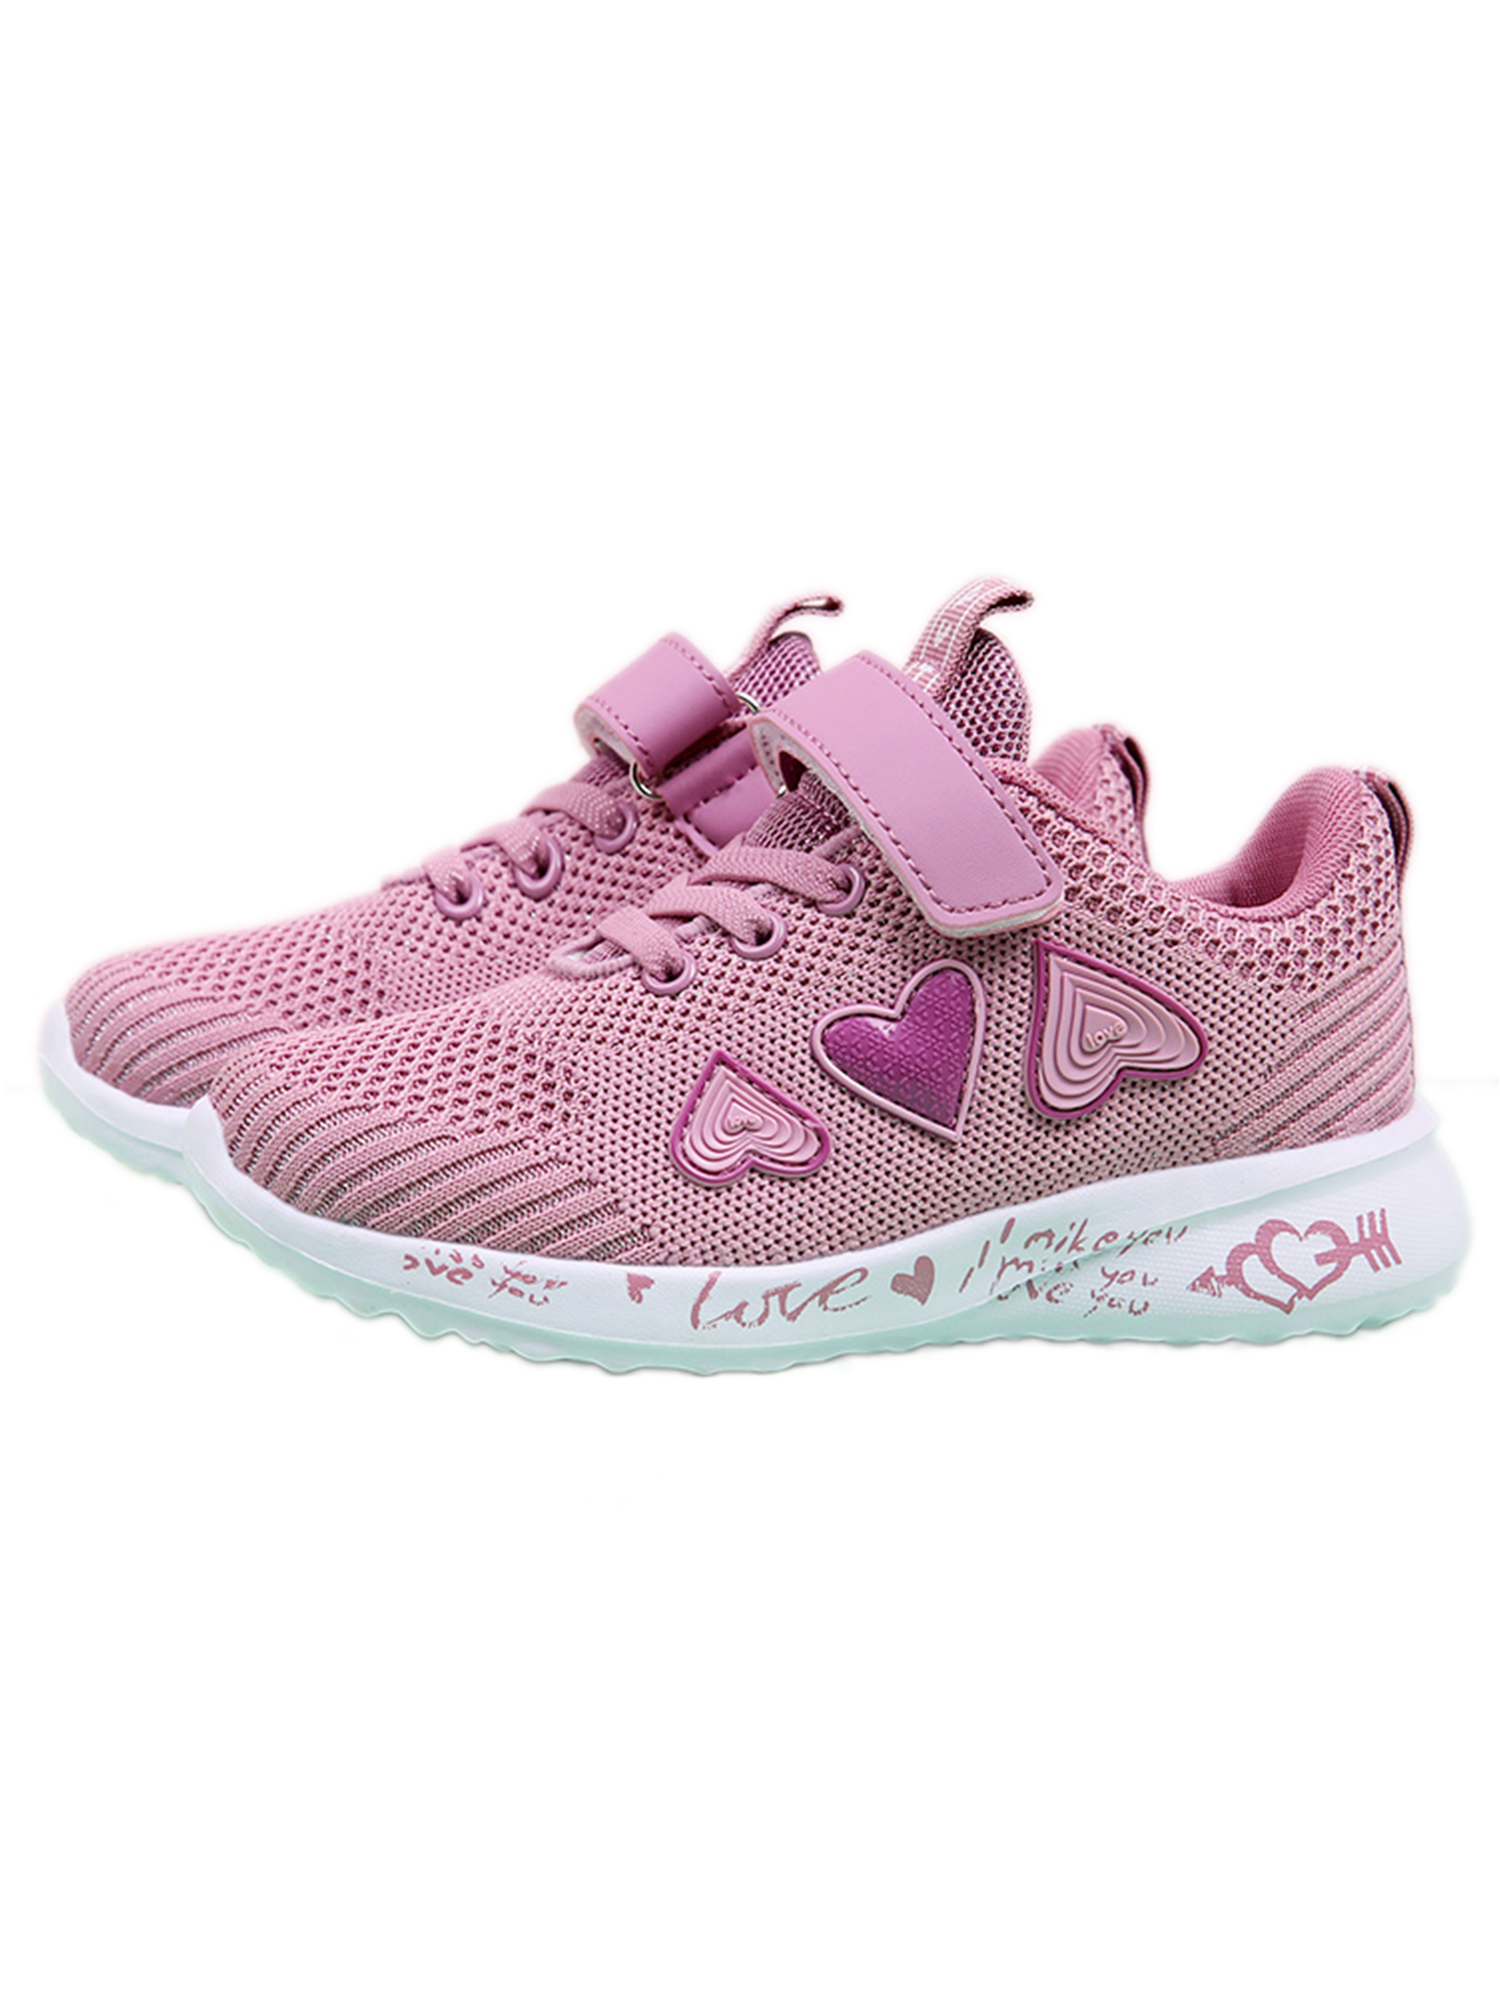 Tanleewa Lovely Girls Sports Shoes Kids Breathable Sneakers Lightweight Casual Shoe Size 13 - image 5 of 7